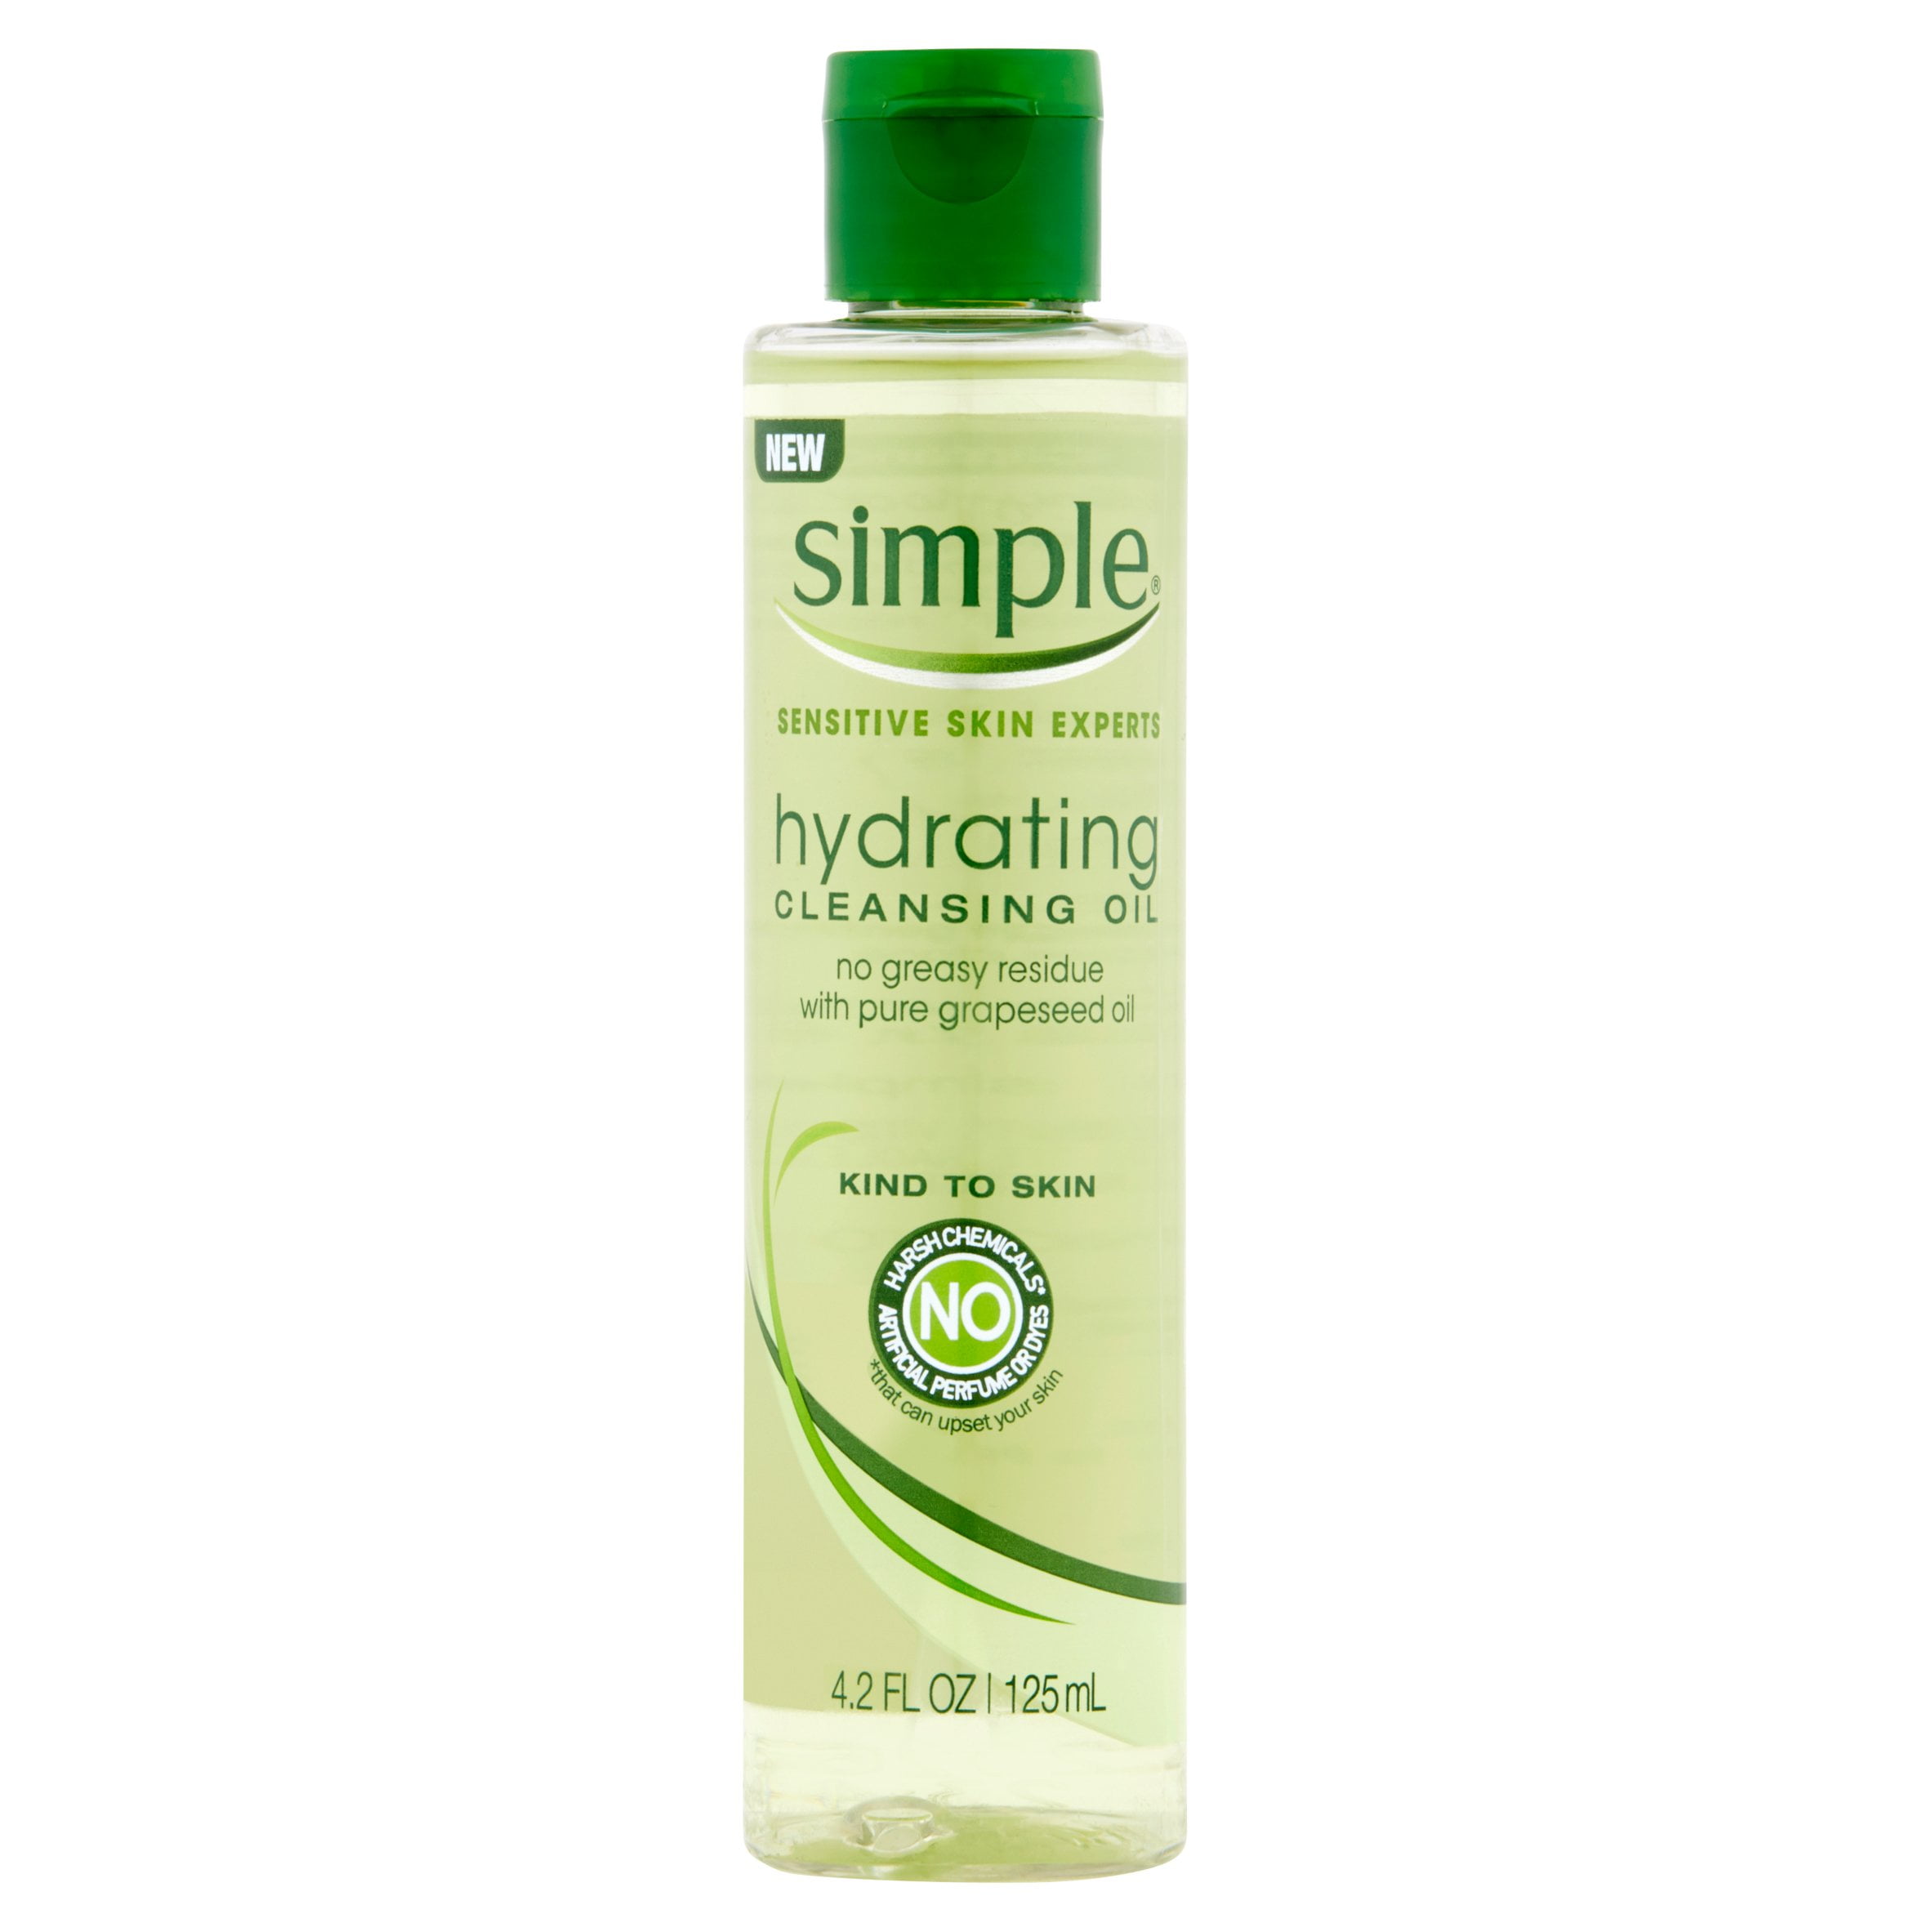 Simple Sensitive Skin Experts Hydrating Cleansing Oil 42 Fl Oz